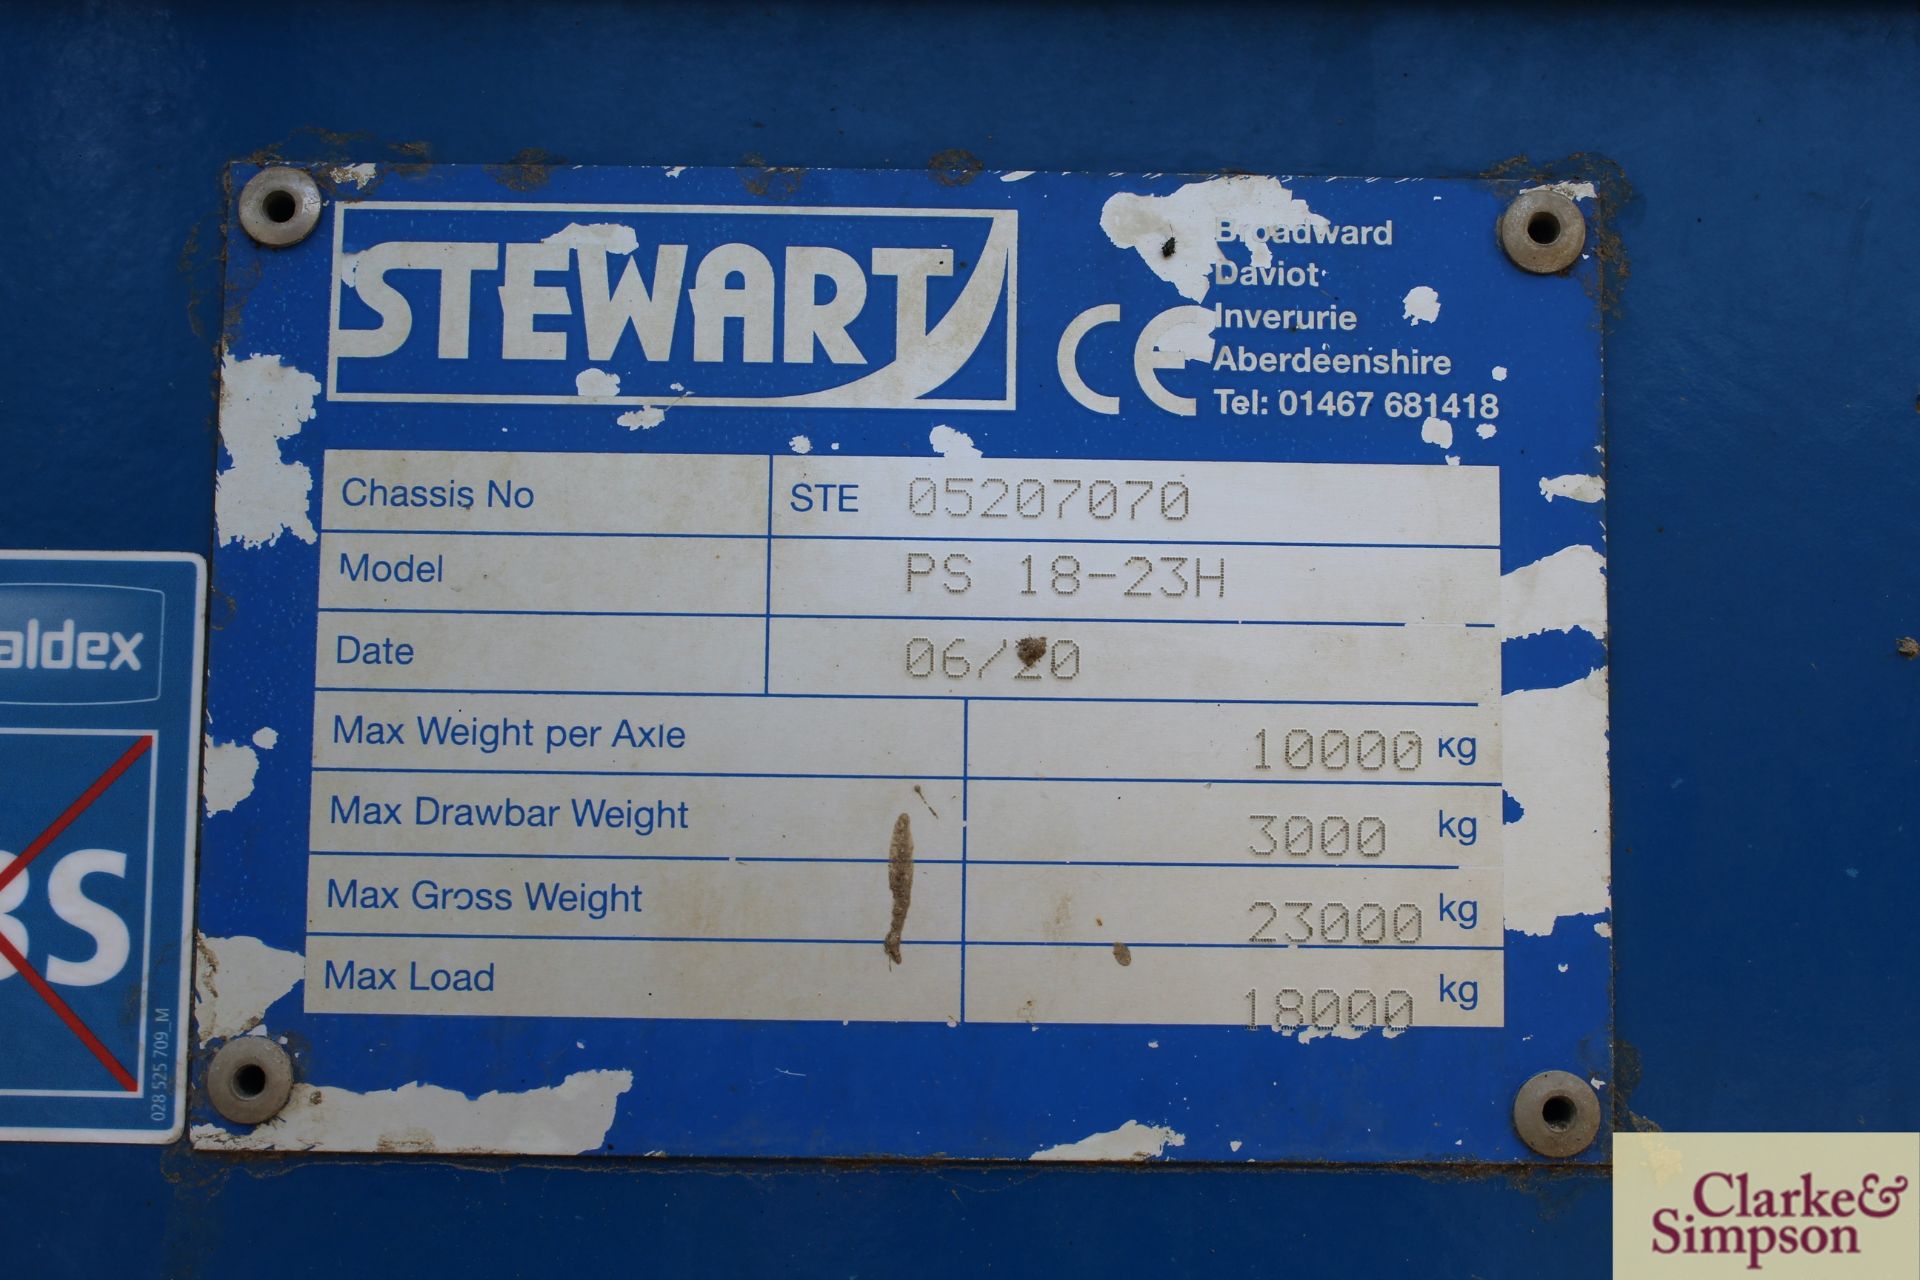 **CATALOGUE CHANGE** Stewart Pro Series 18-23H 18T twin axle tipping trailer. 06/2020. Serial number - Image 40 of 40